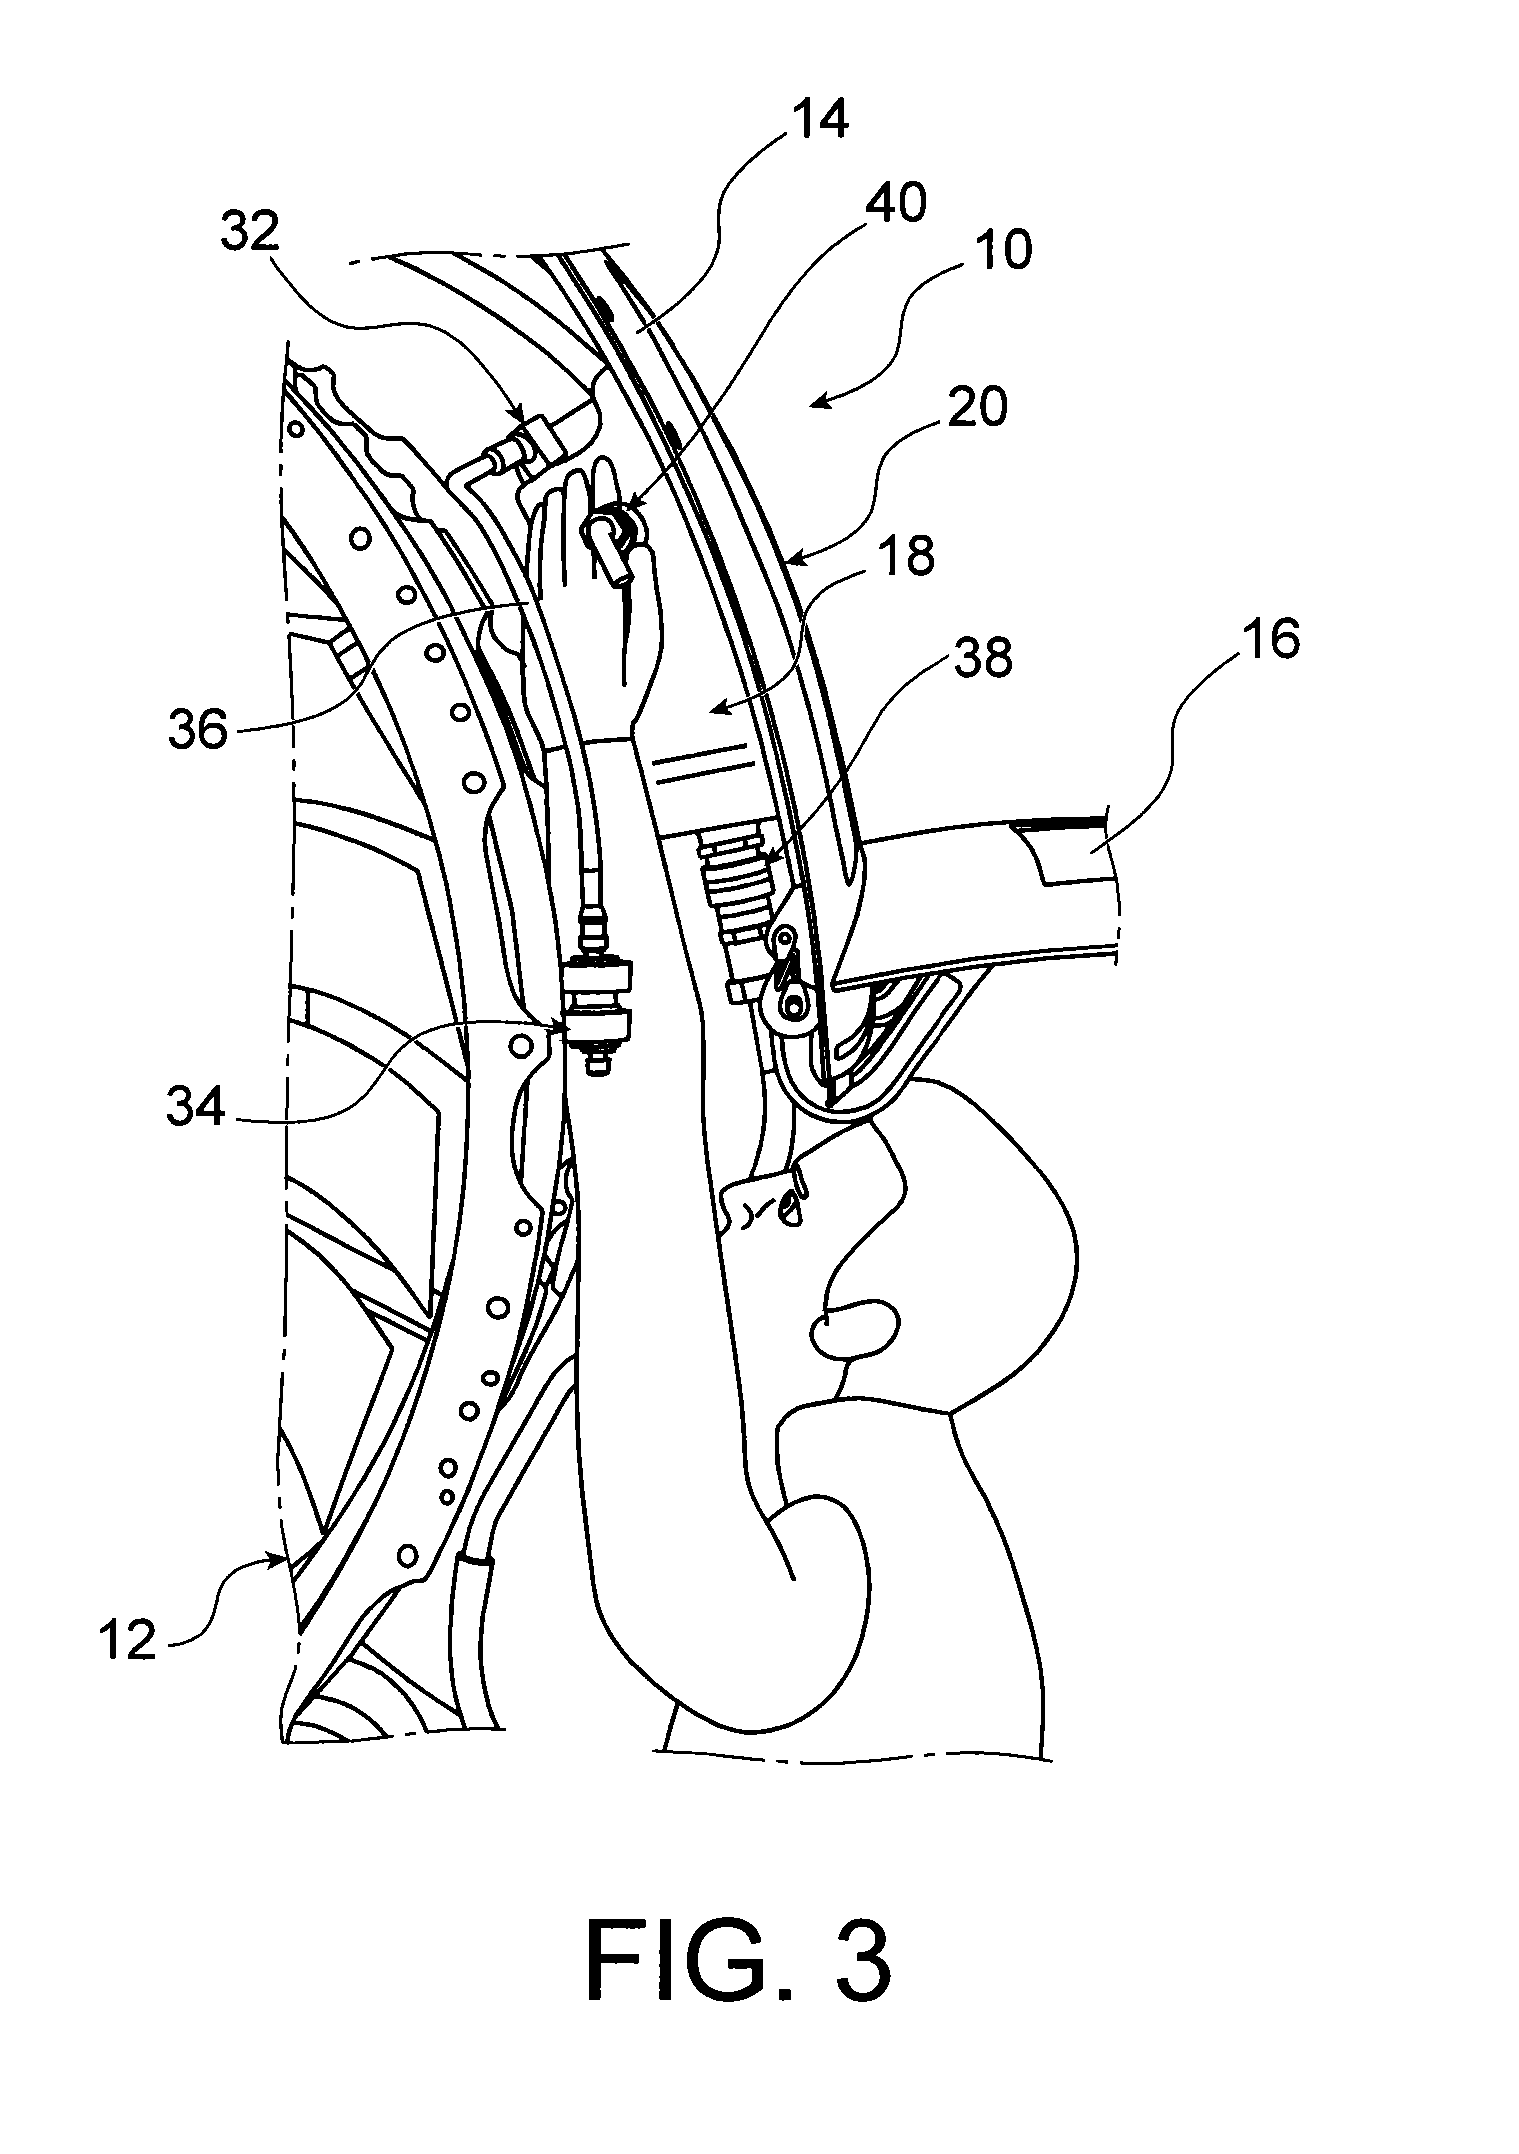 Arrangement for a tank between a nacelle cowling and a turbomachine